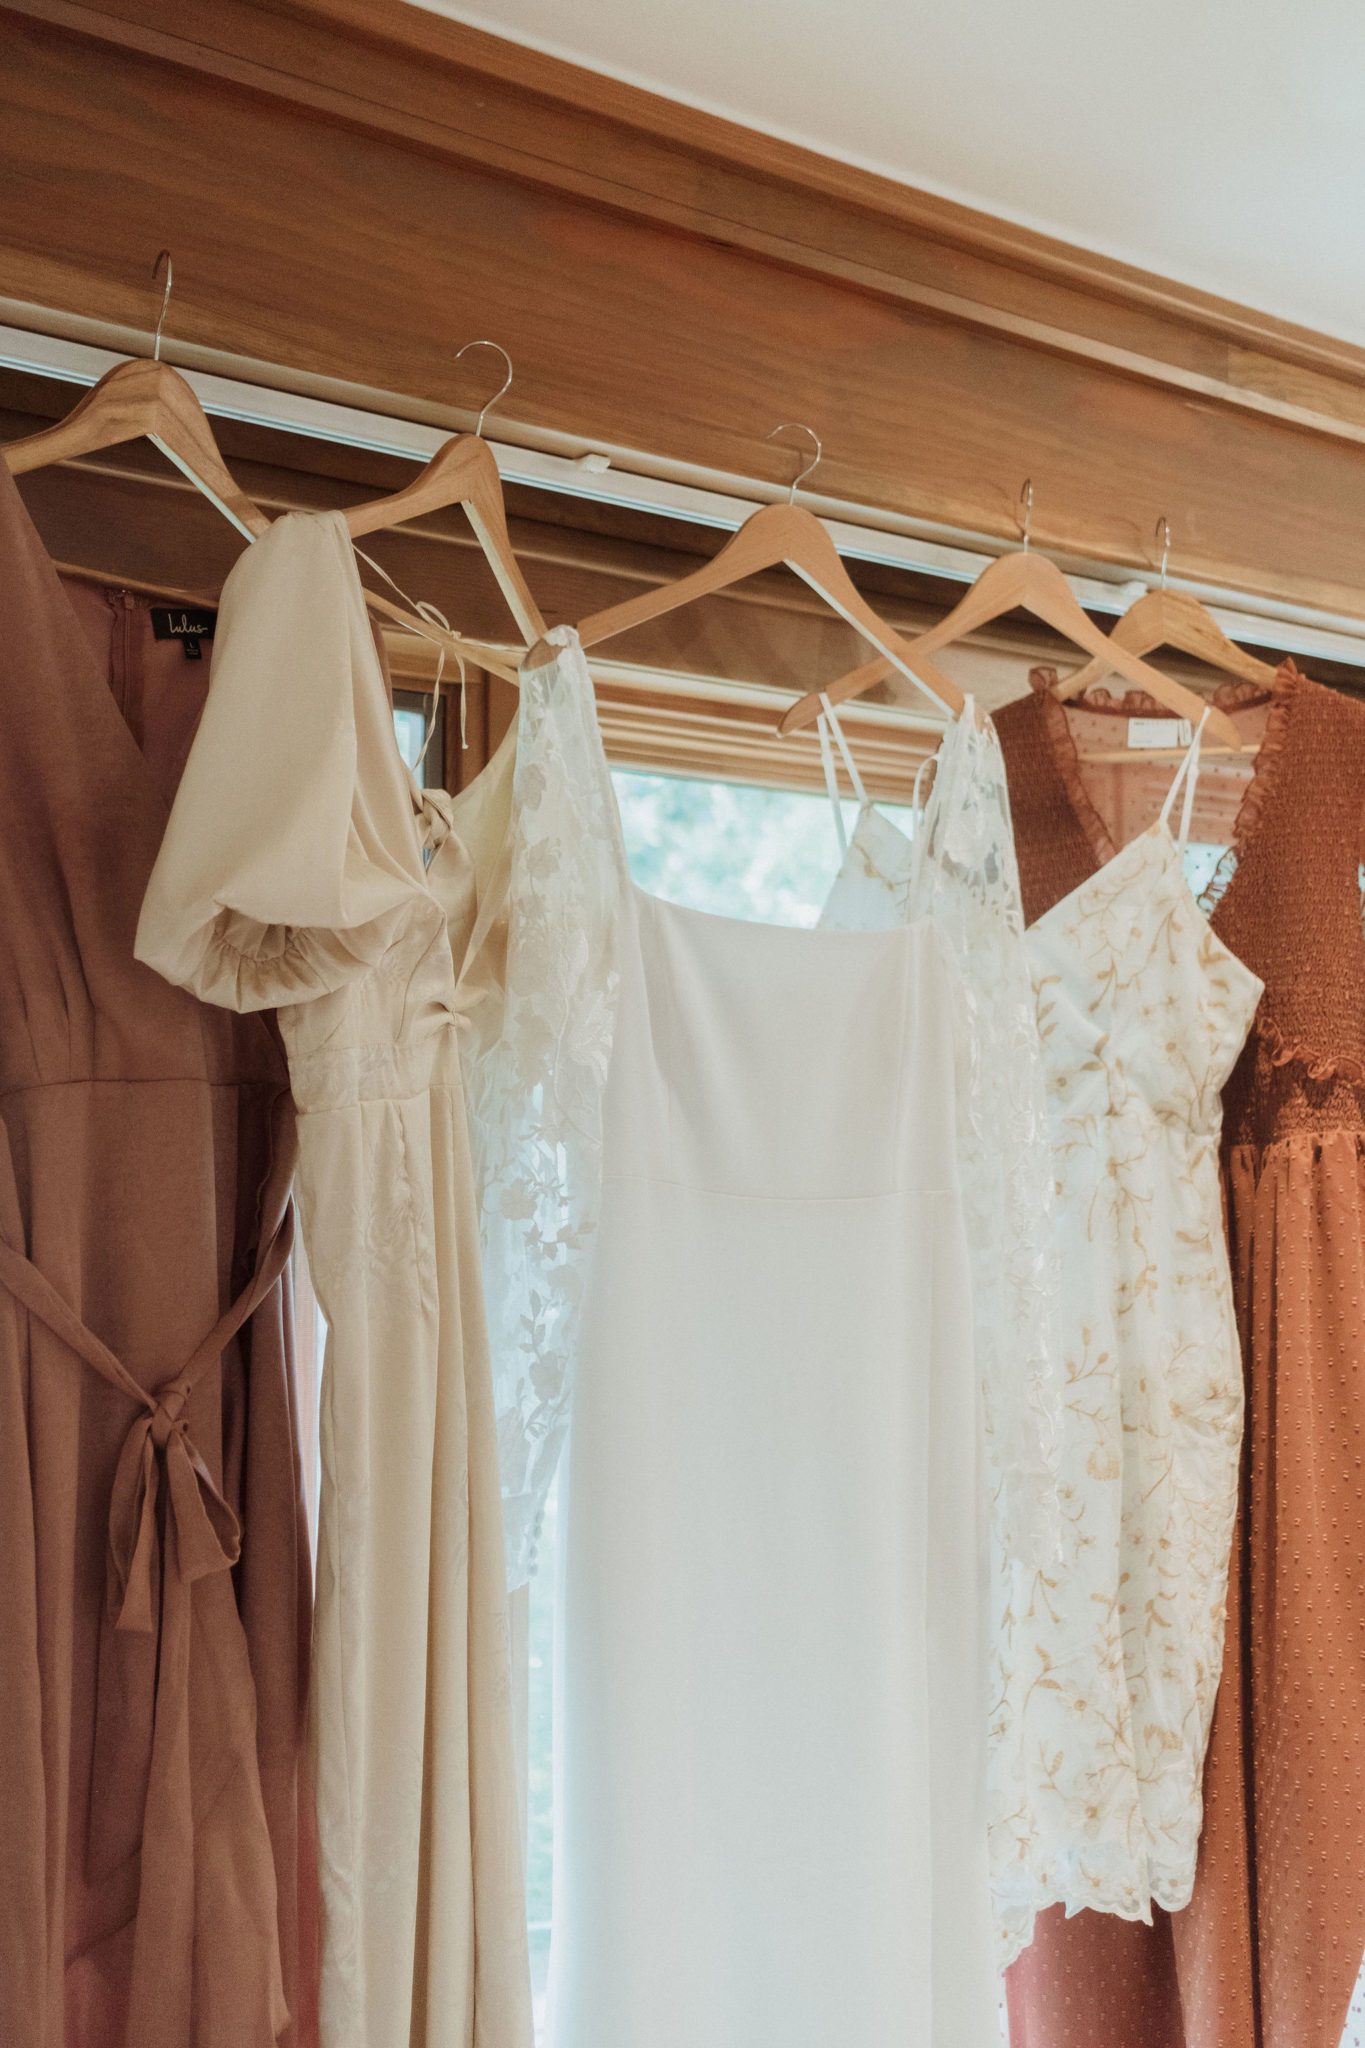 Getting ready for cottage core wedding, bride and bridesmaid's dresses